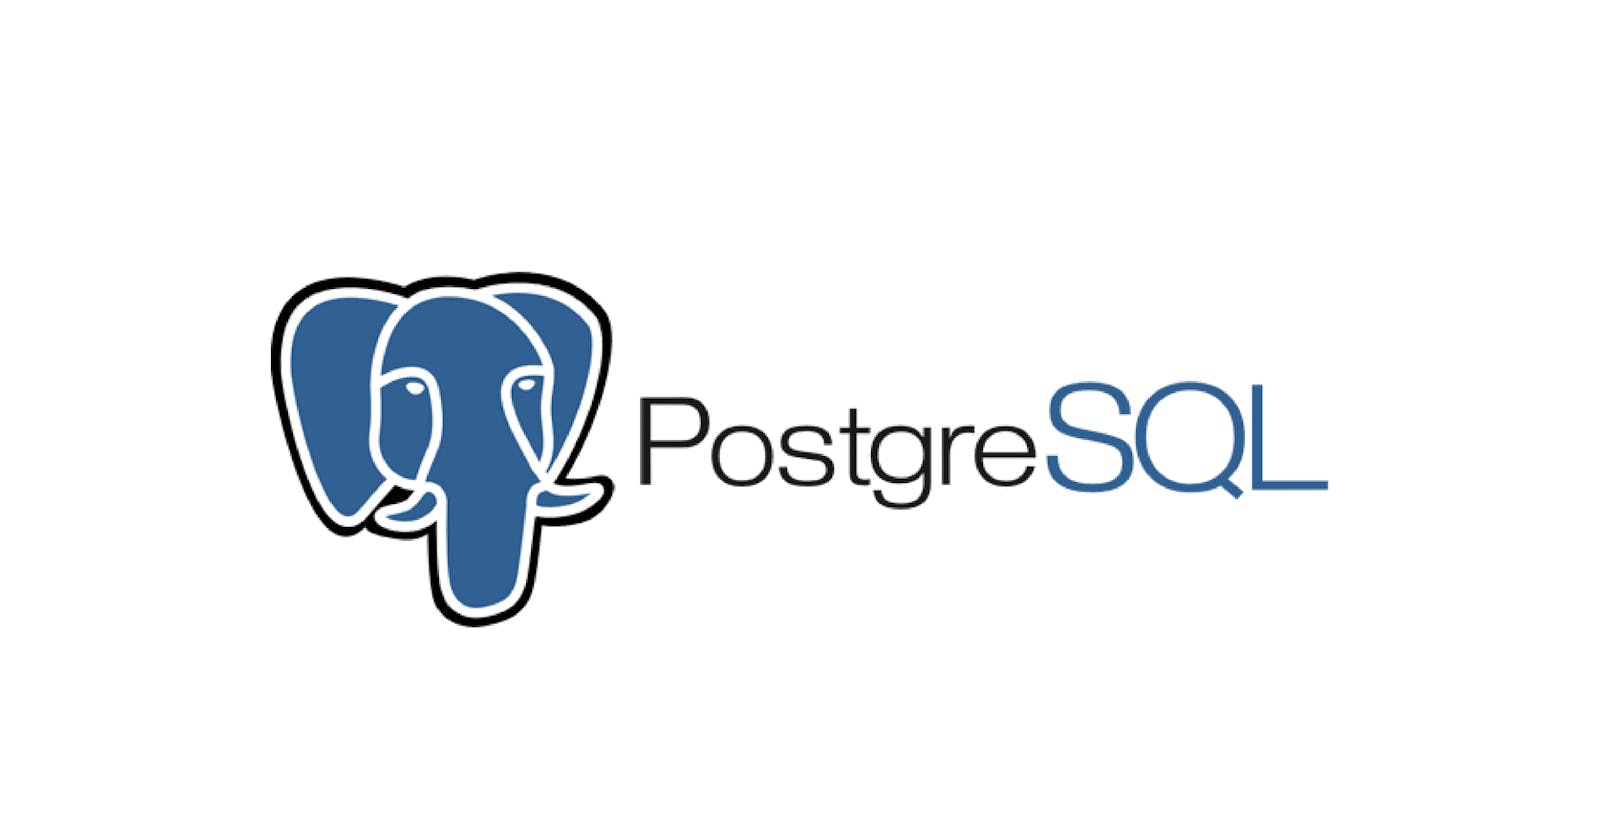 Why PostgreSQL is a Top Choice for Data Management and Applications